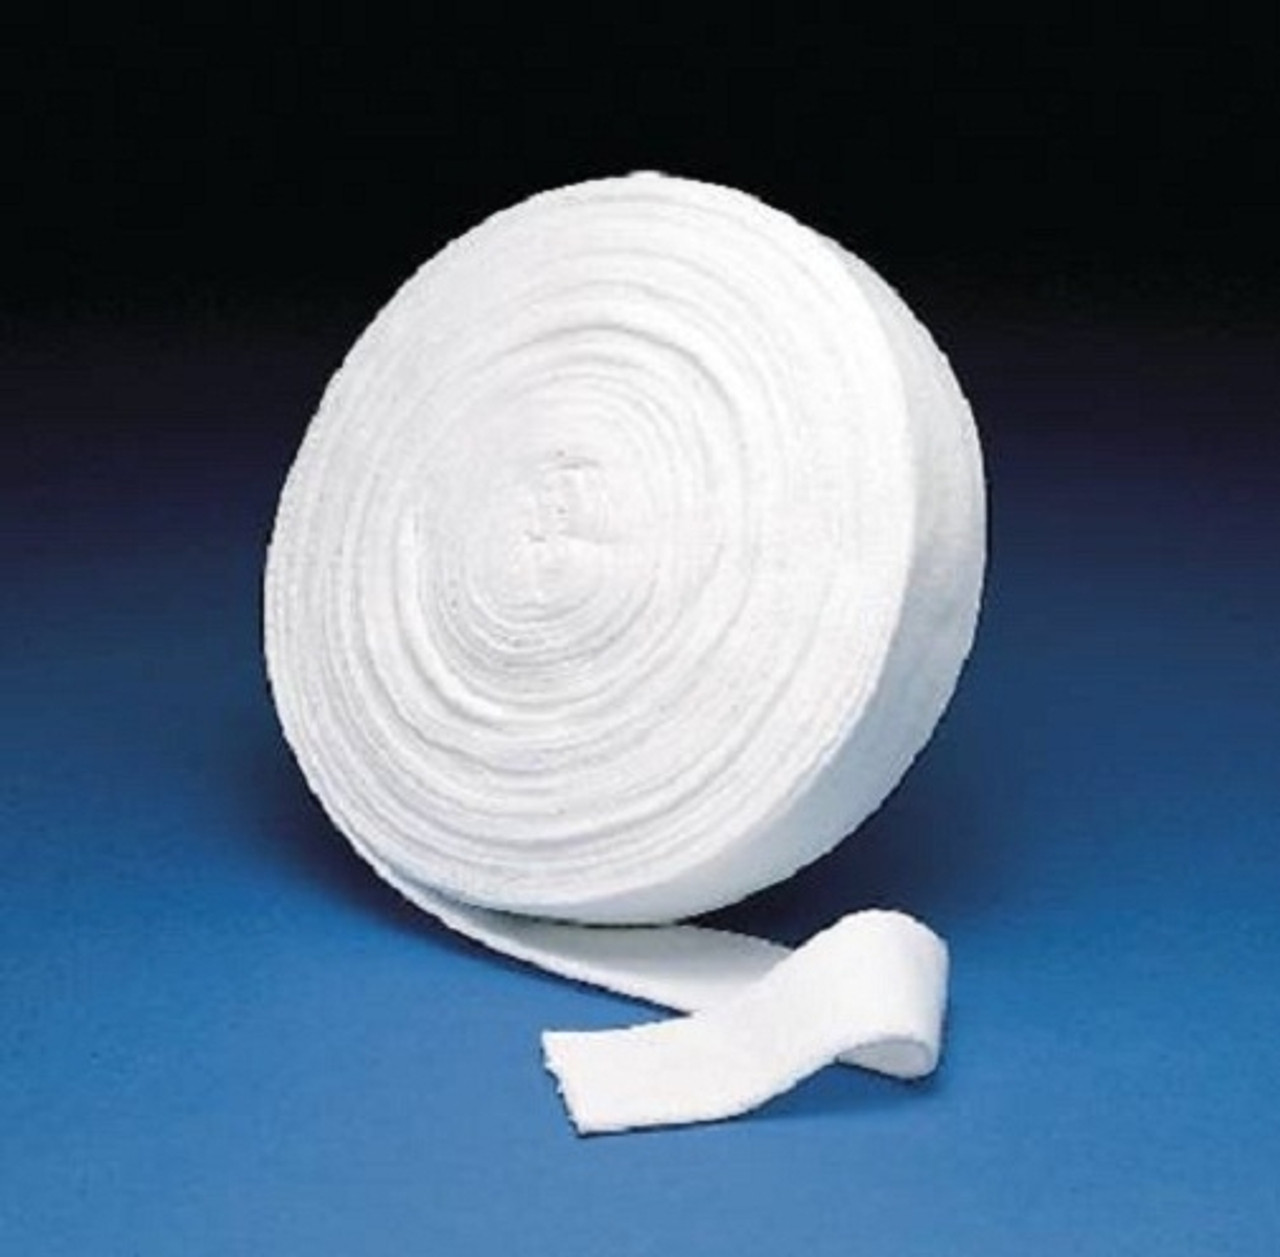 3M-MS03 STOCKINETTE ORTHOPEDIC 1-PLY NON STERILE POLYESTER BLEND 3" x 25yd BX/1